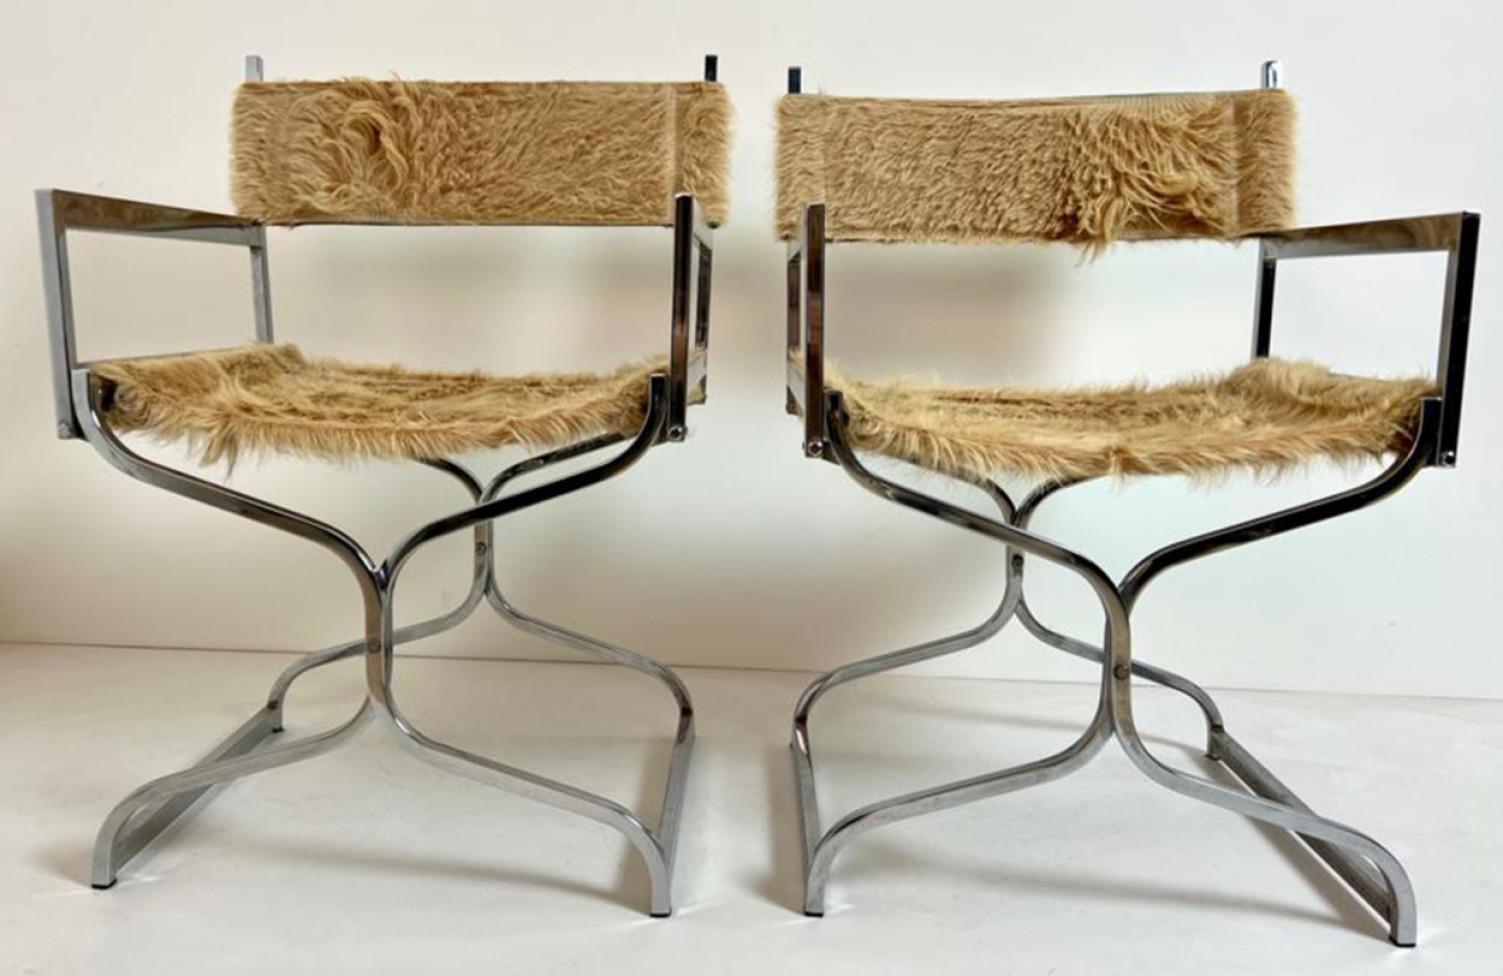 Other Set of Two Chrome Chairs With Horse Skin Upholstery by Arrmet, Italy